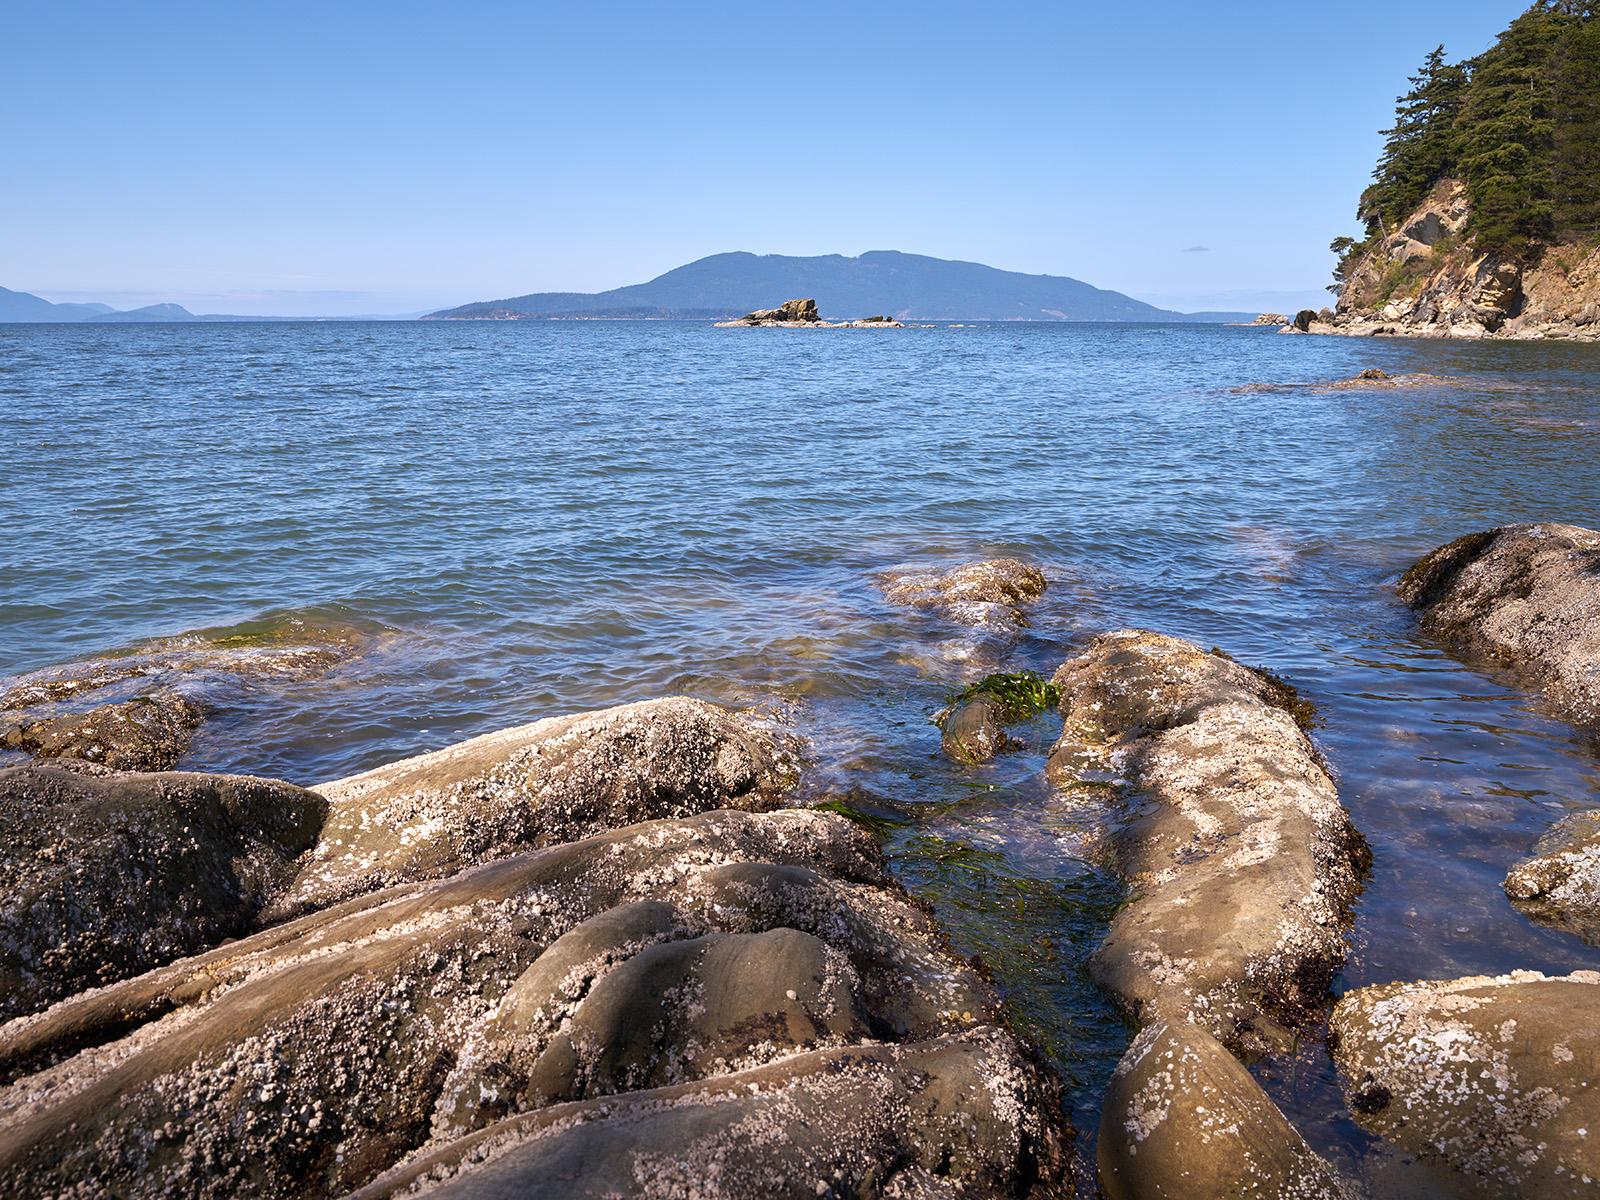 Rocky shoreline looking out to water with mountain range in background.